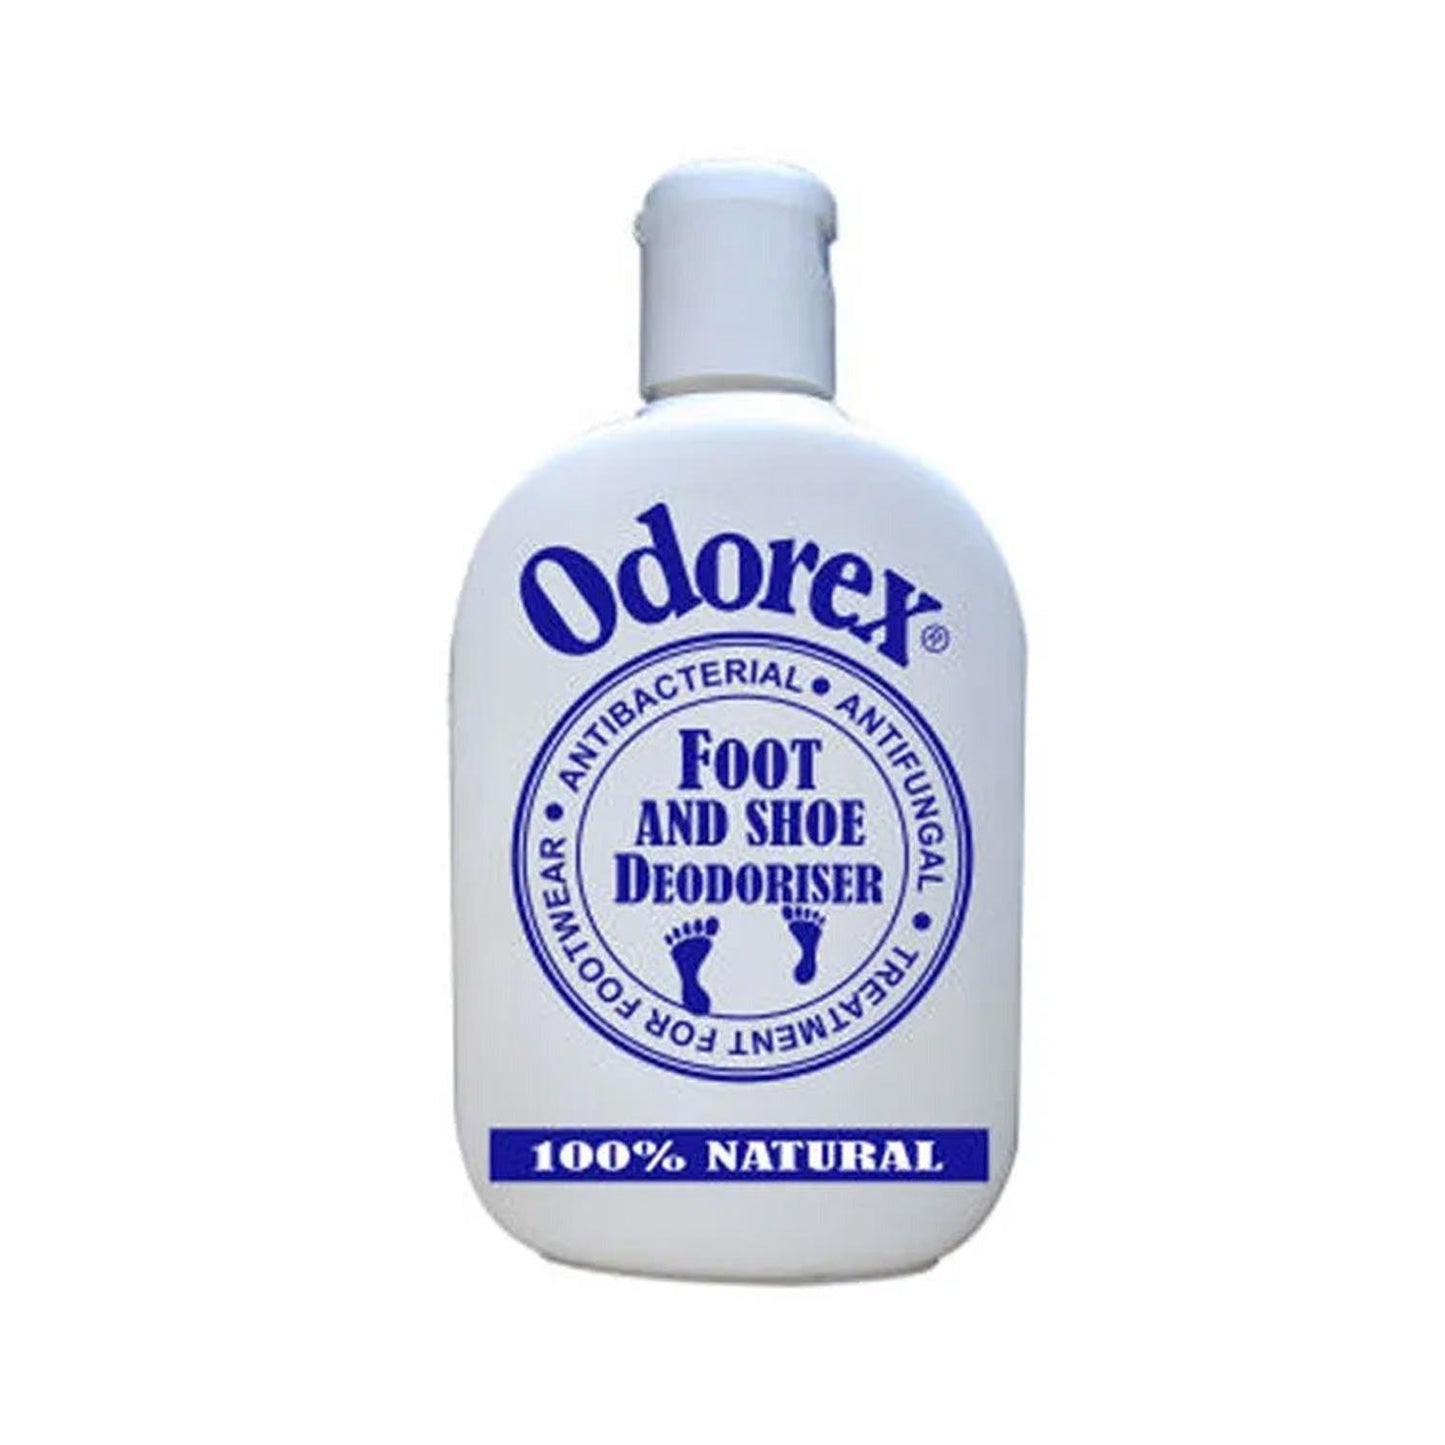 Odorex Original Foot Odour and Tinea treatment Powder. Blue and Green available - Natural packaging. 30g or 60g - Anjelstore 